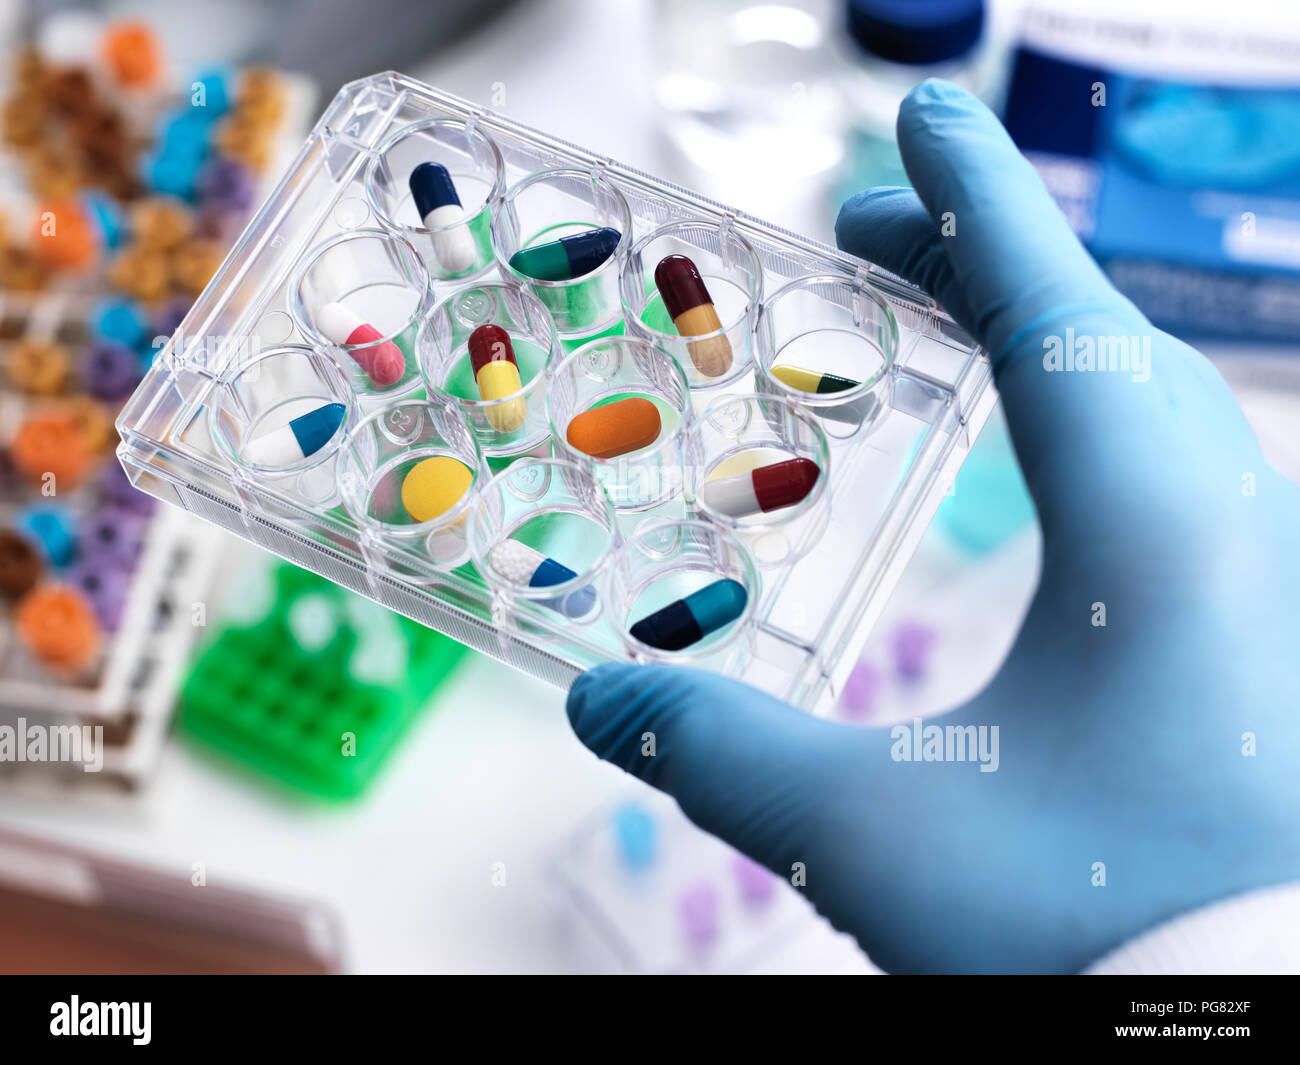 Pharmaceutical Research, Scientist holding a multi well plate containing drugs to be tested in the laboratory Stock Photo